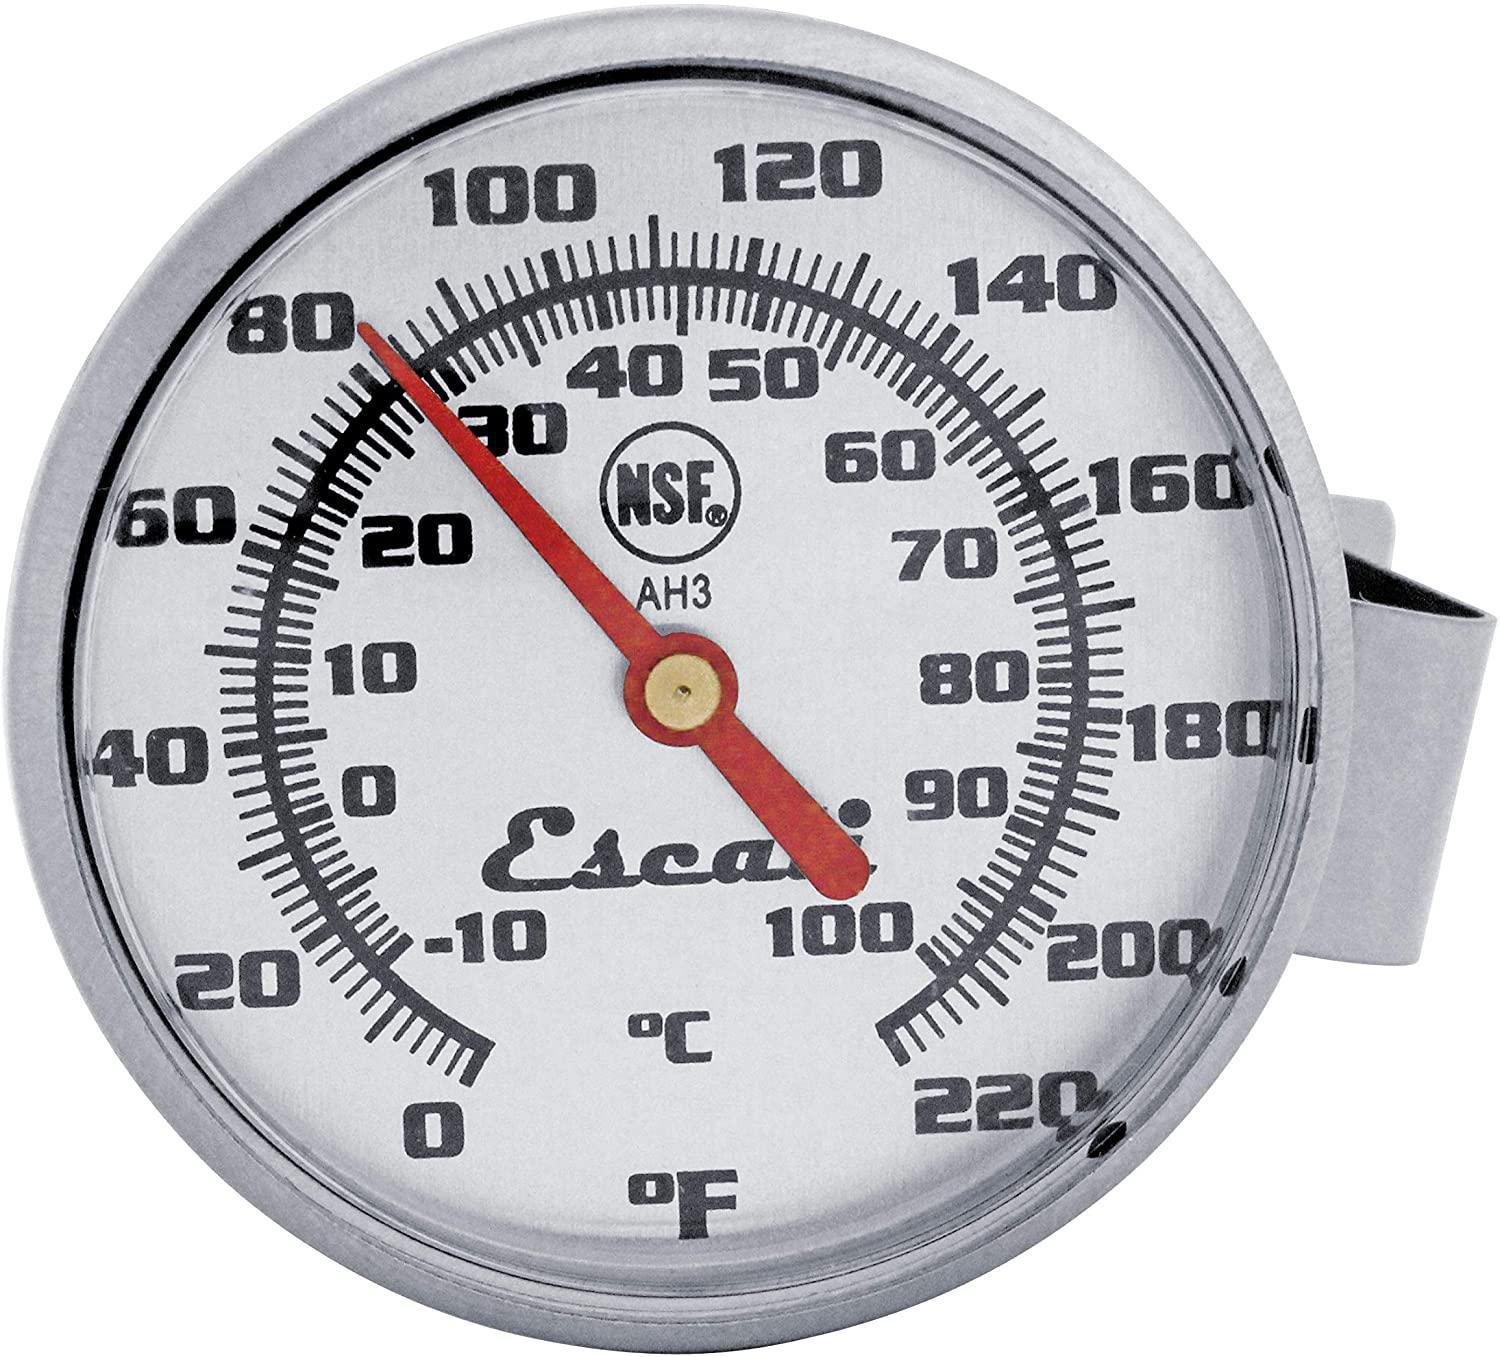 Kitchen Oven Thermometers Large Easy-Read Face Meat Thermometer